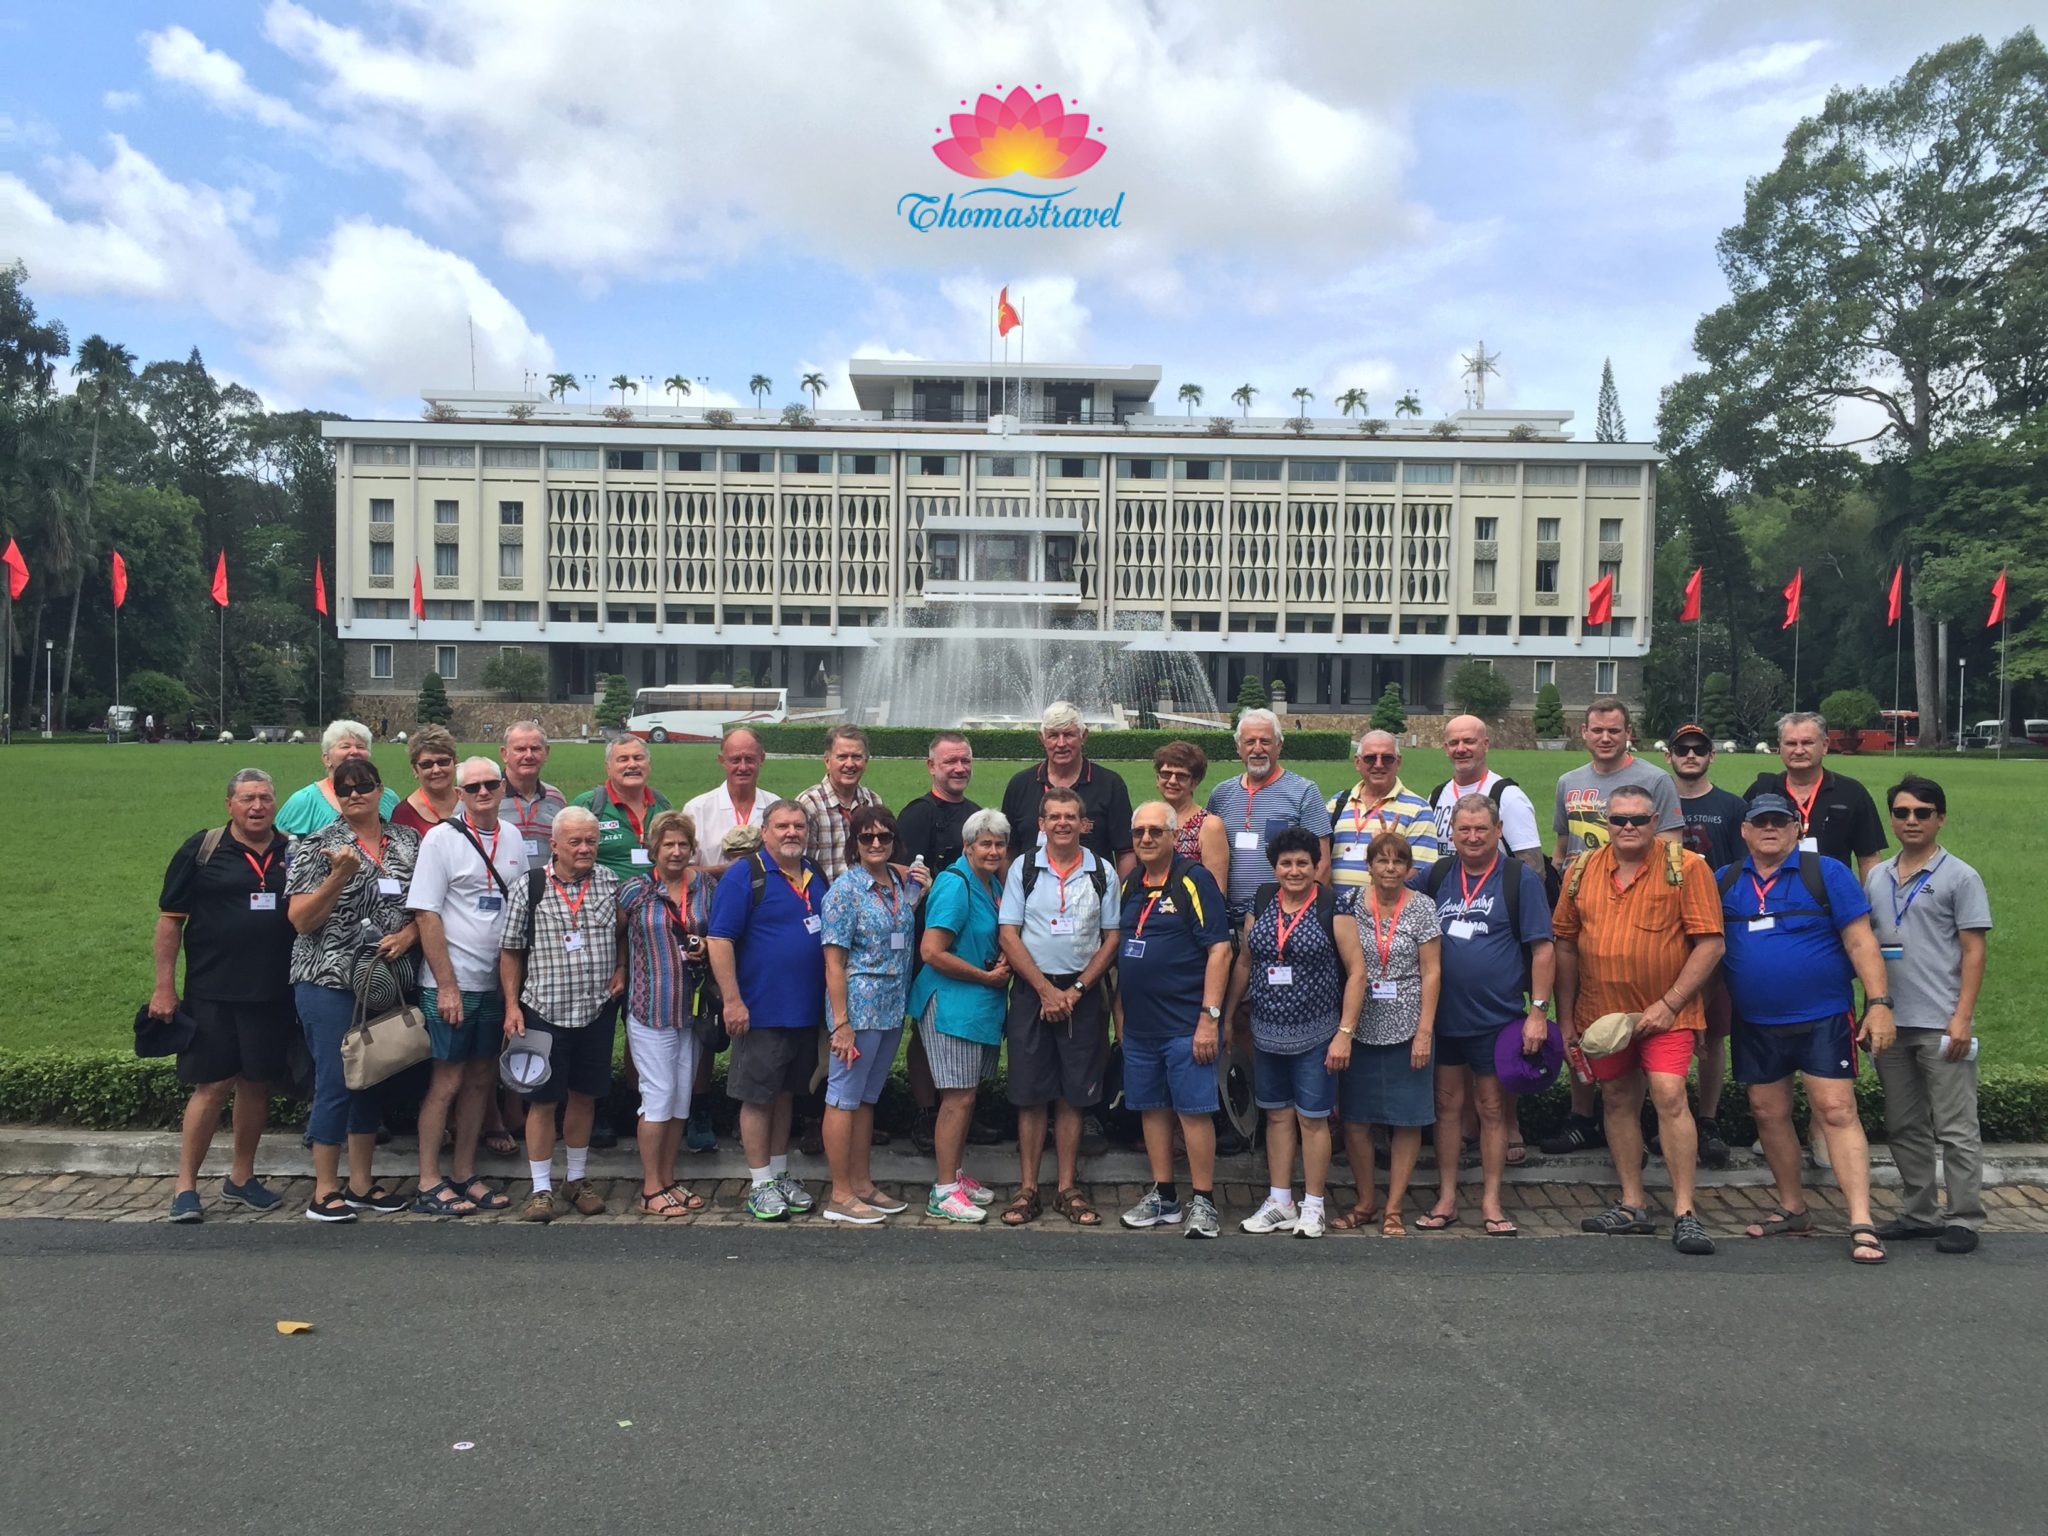 A large group of Thomas took memories photo at the Independence Palace